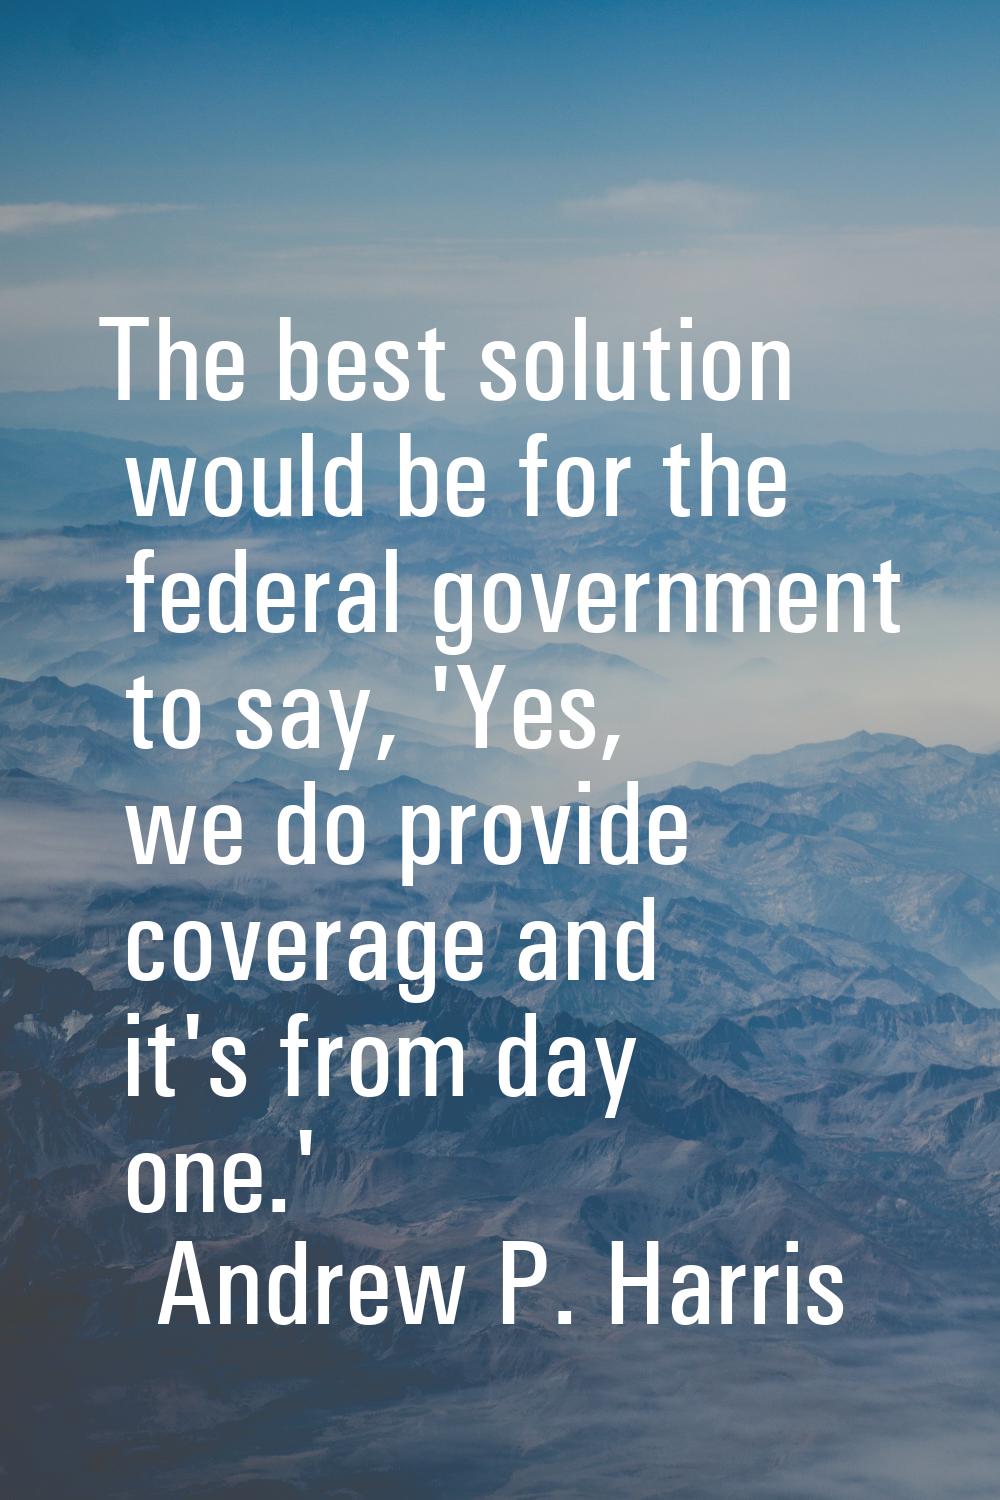 The best solution would be for the federal government to say, 'Yes, we do provide coverage and it's